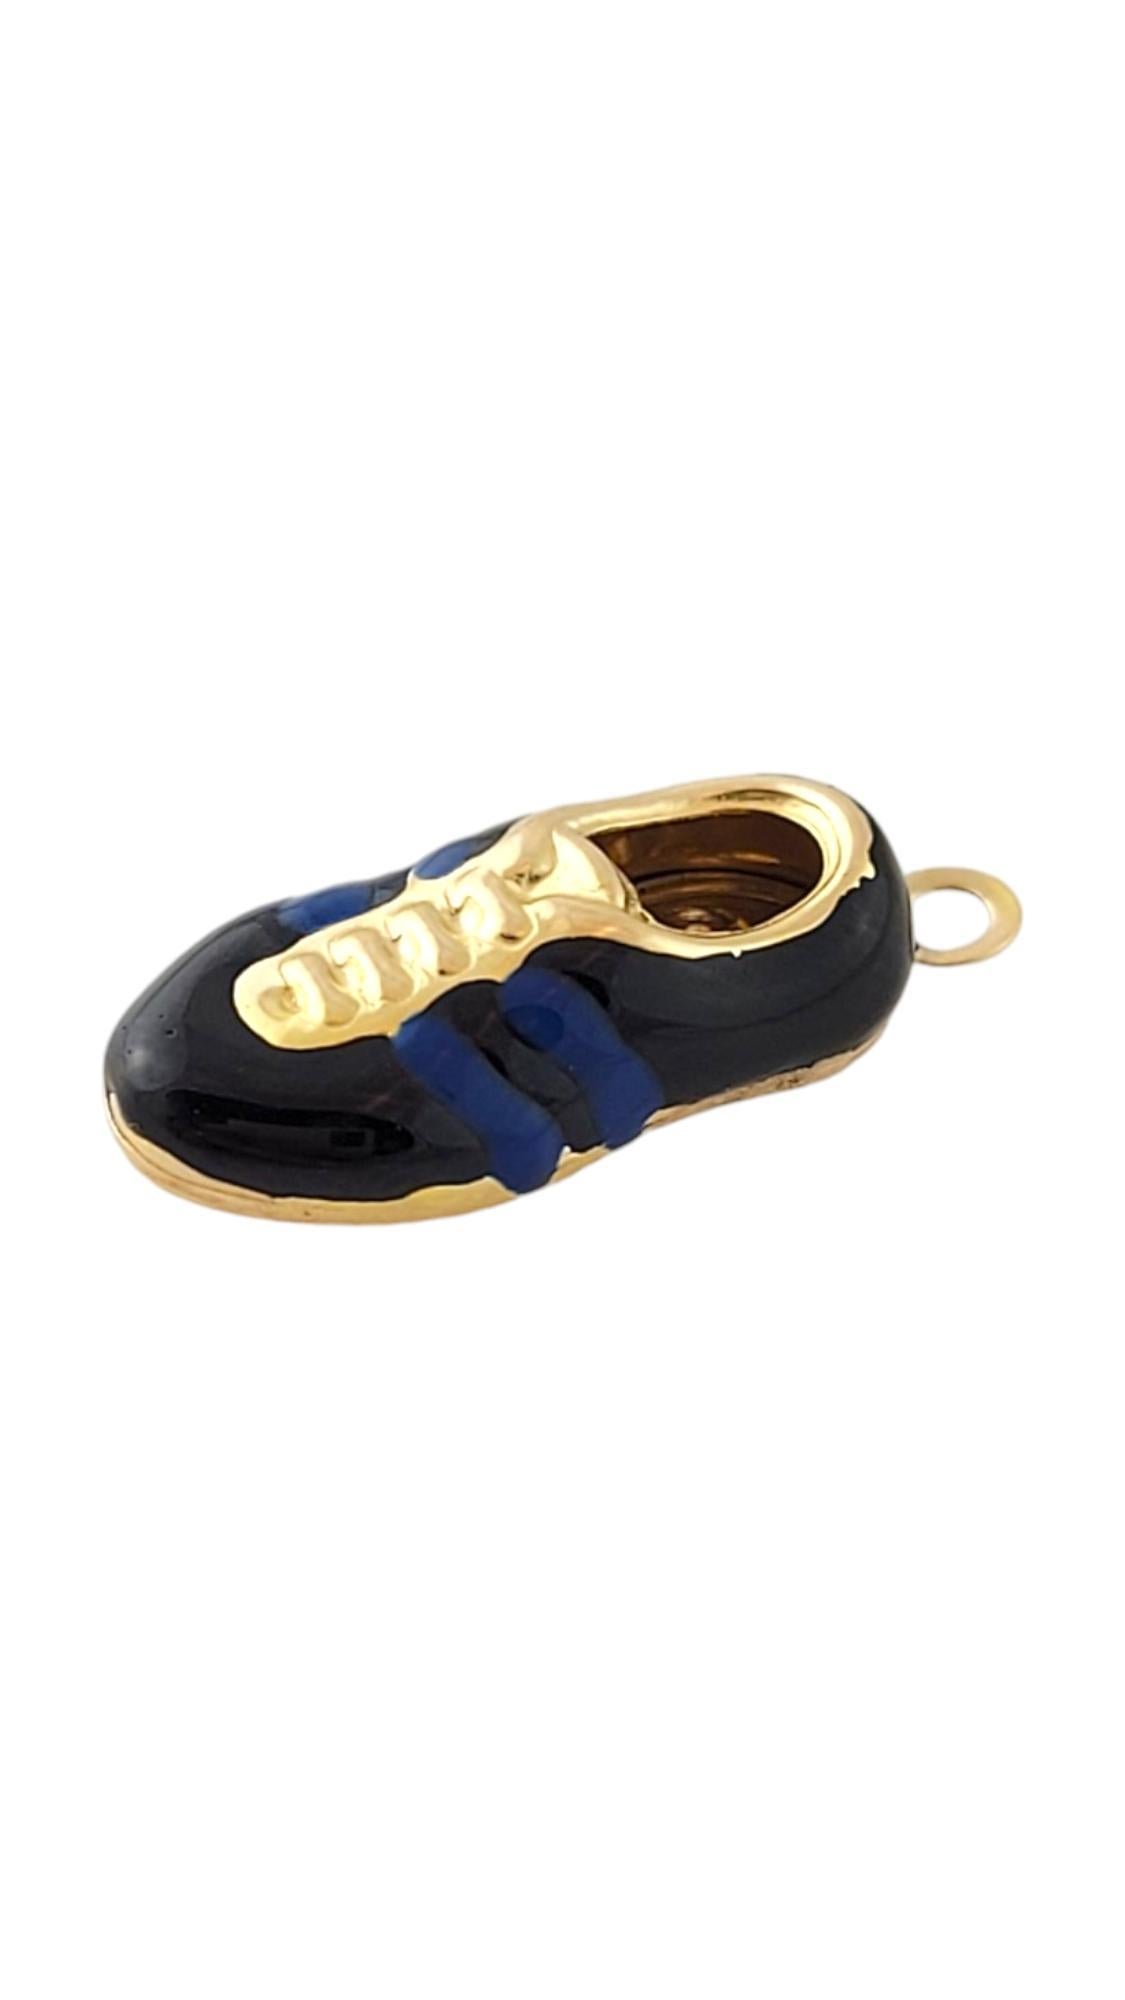 14K Yellow Gold Black & Blue Enamel Sneaker Charm #17345 In Good Condition For Sale In Washington Depot, CT